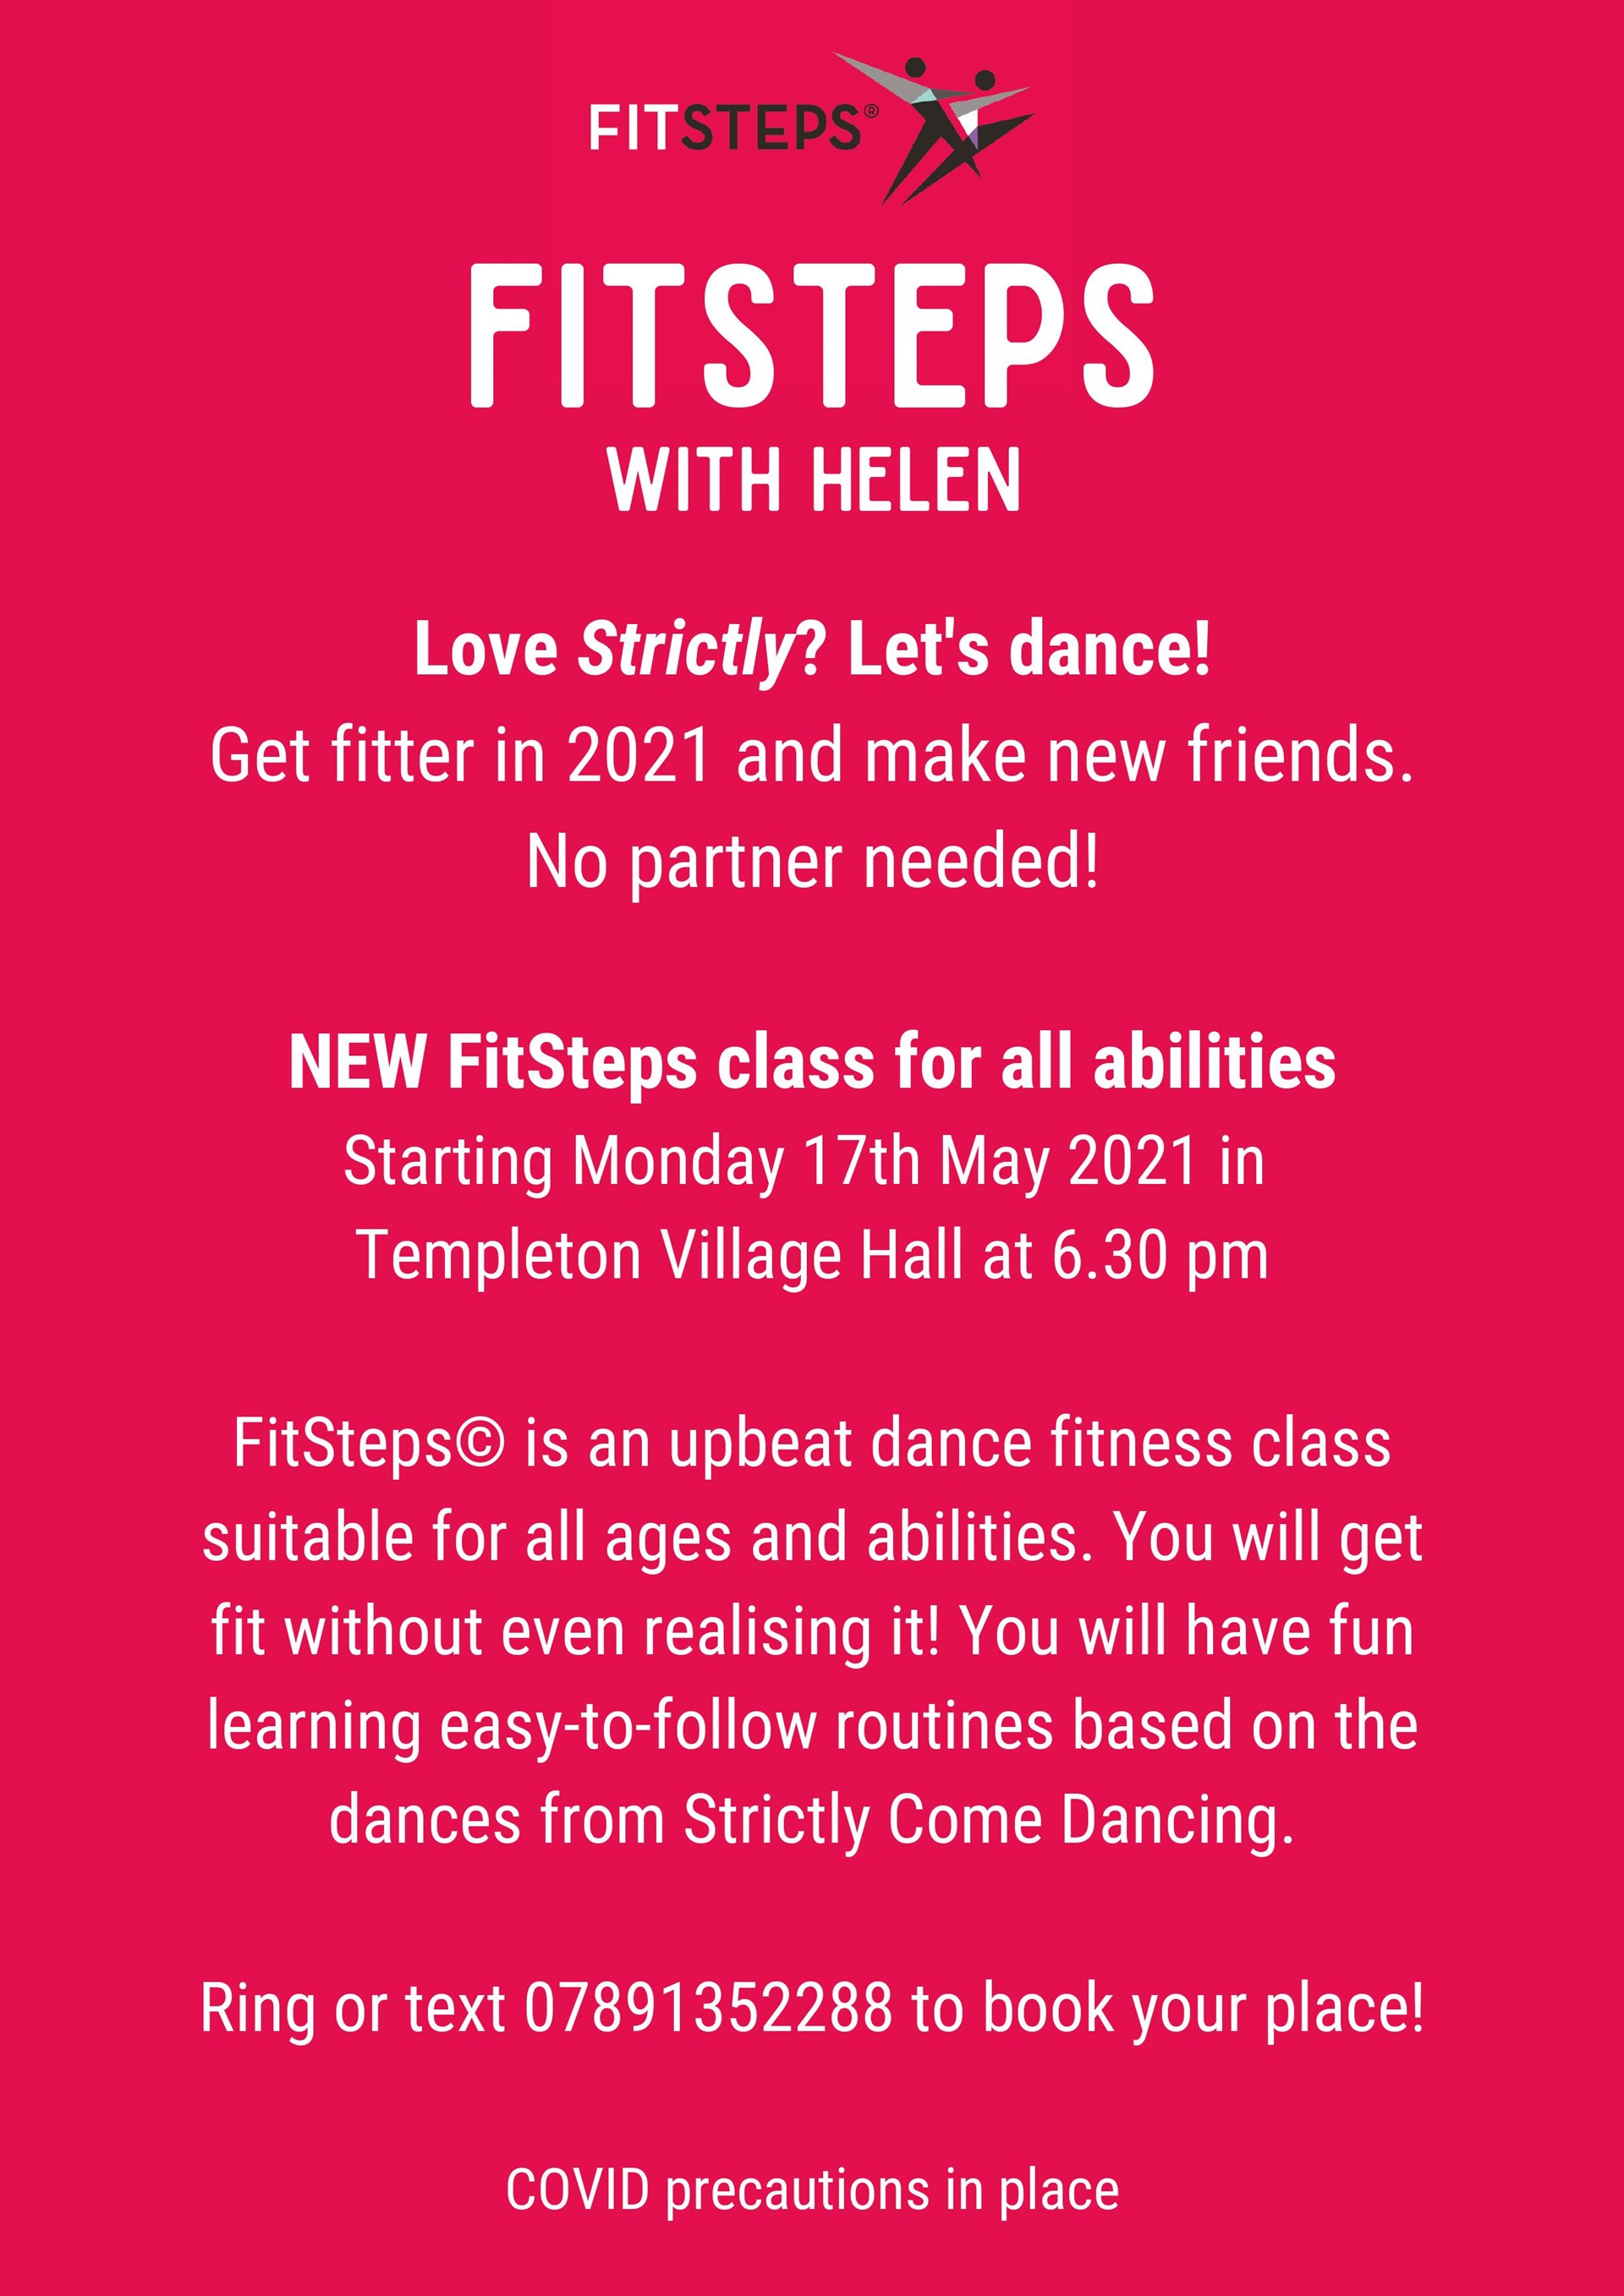 Strictly Fitsteps - Monday evenings